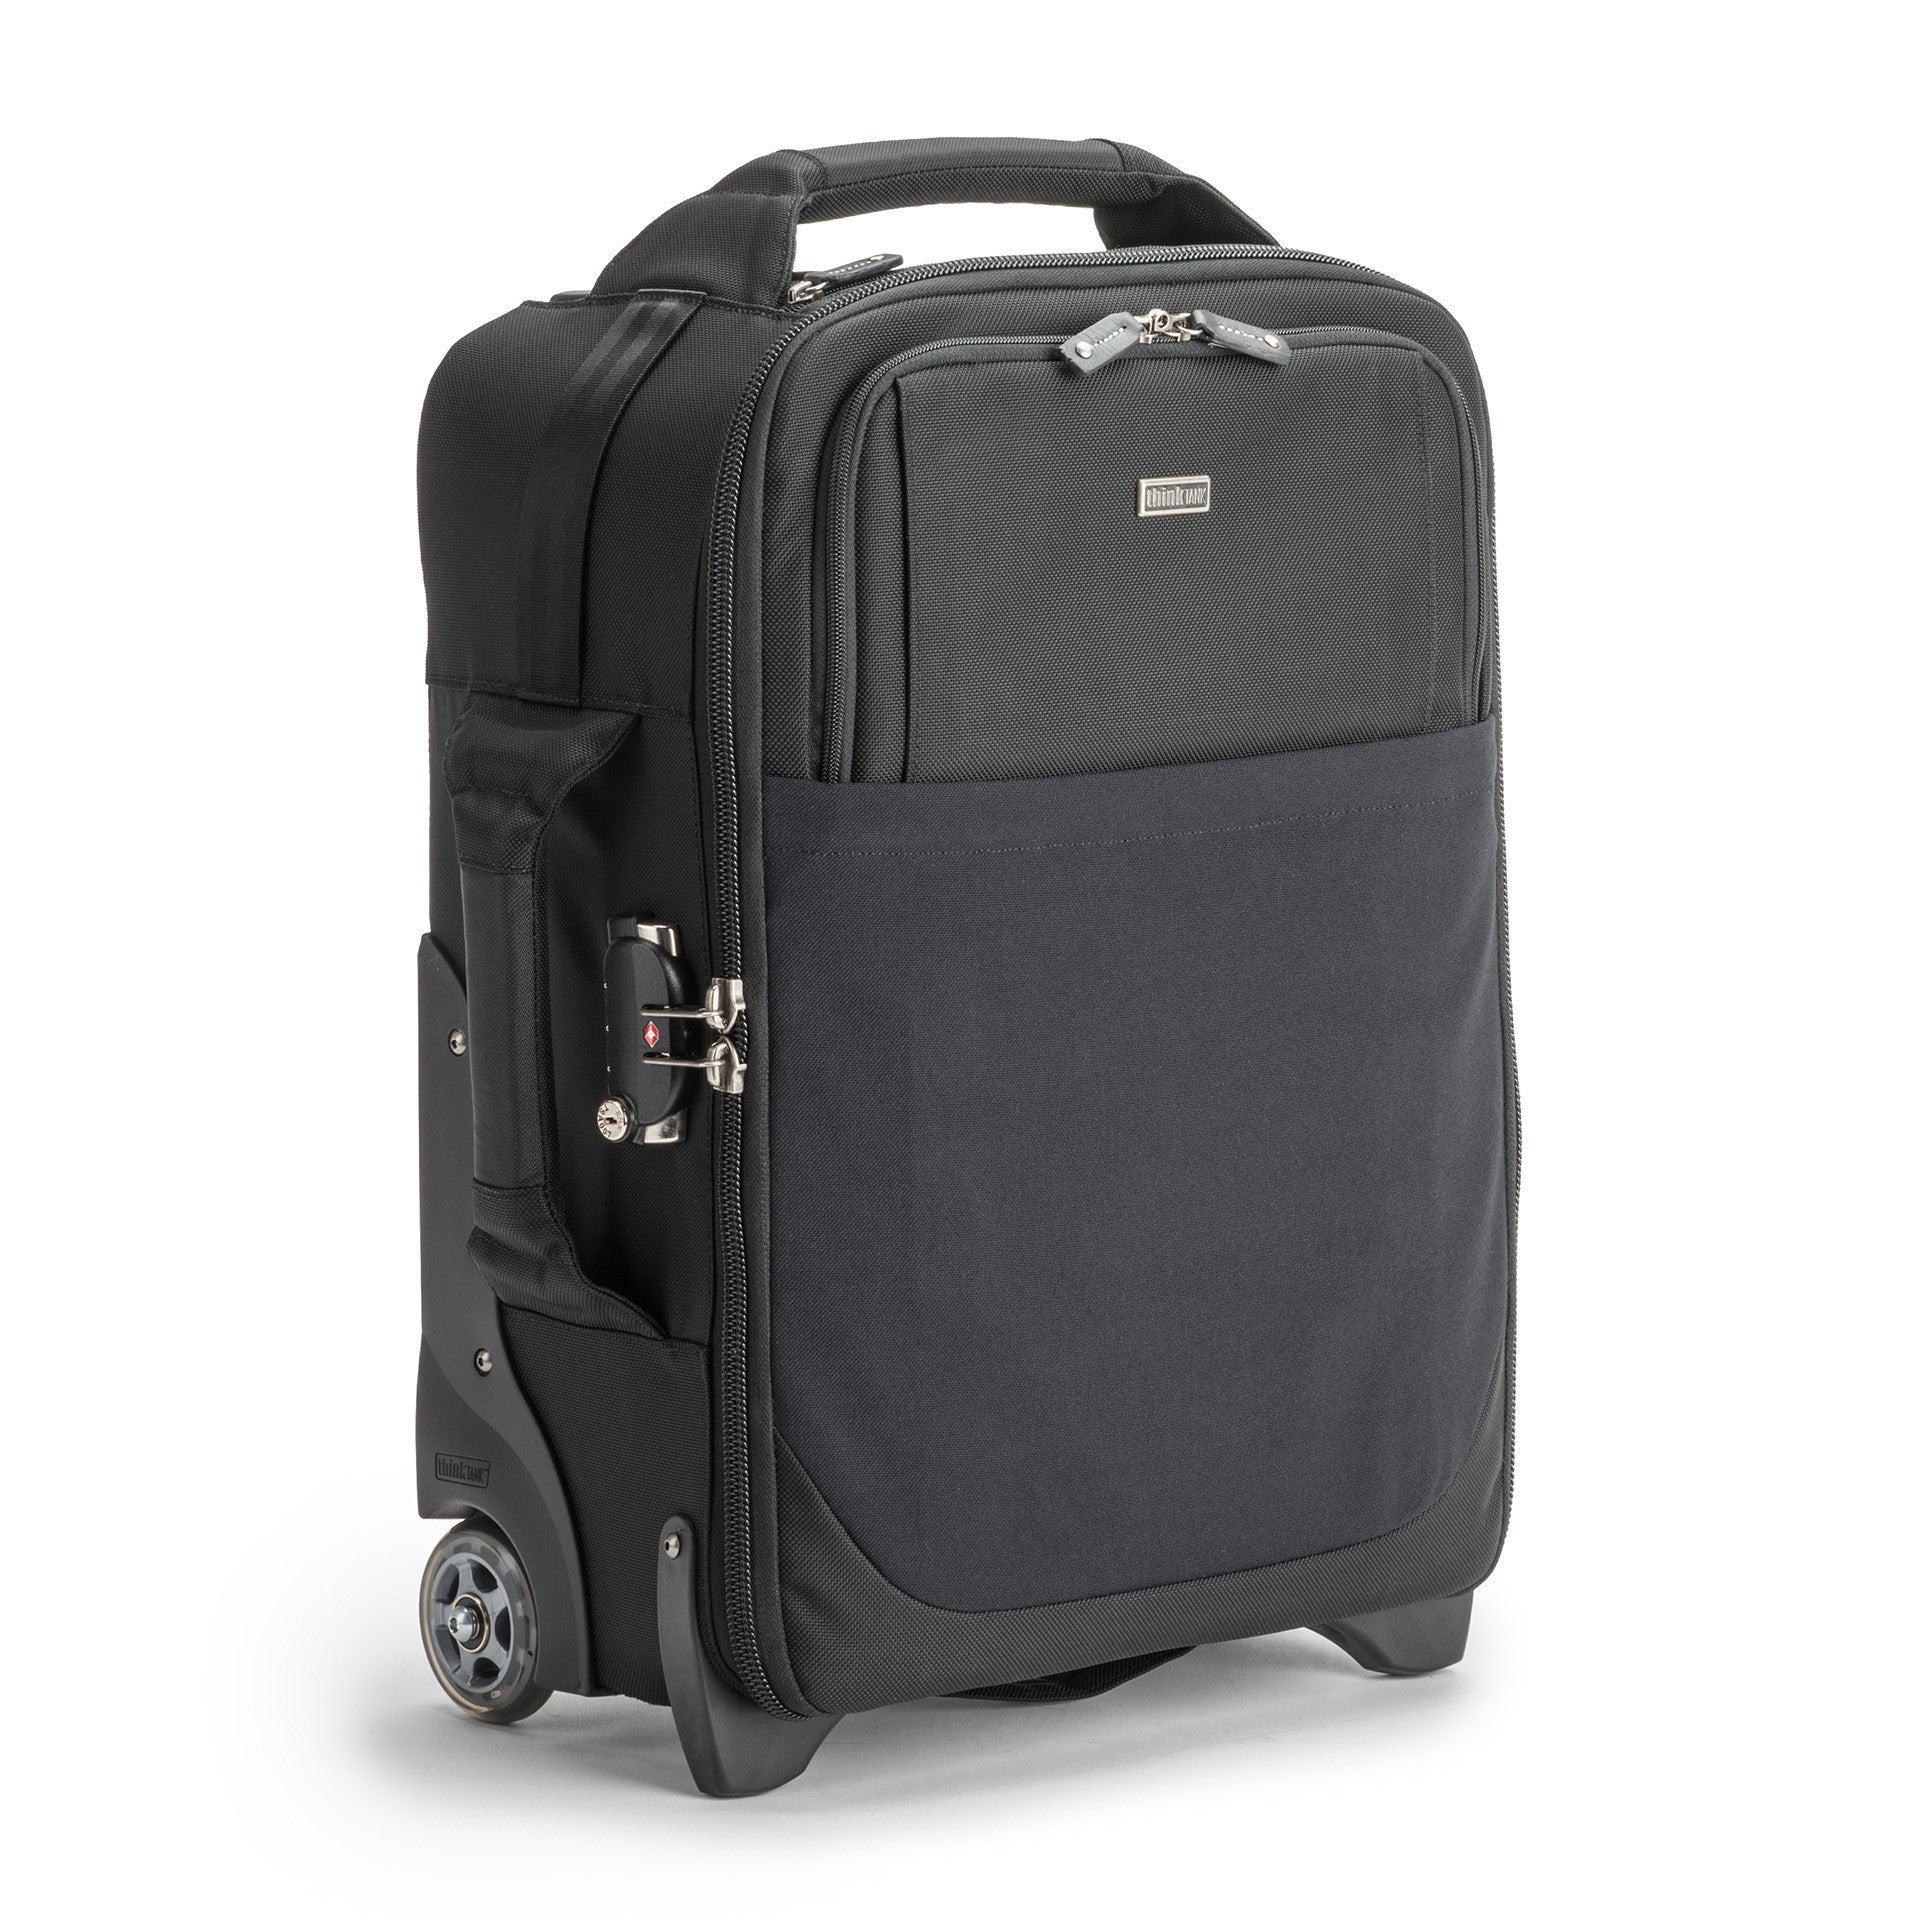 Think Tank Airport International V3.0 Rolling Camera Bag, bags roller bags, Think Tank Photo - Pictureline  - 1